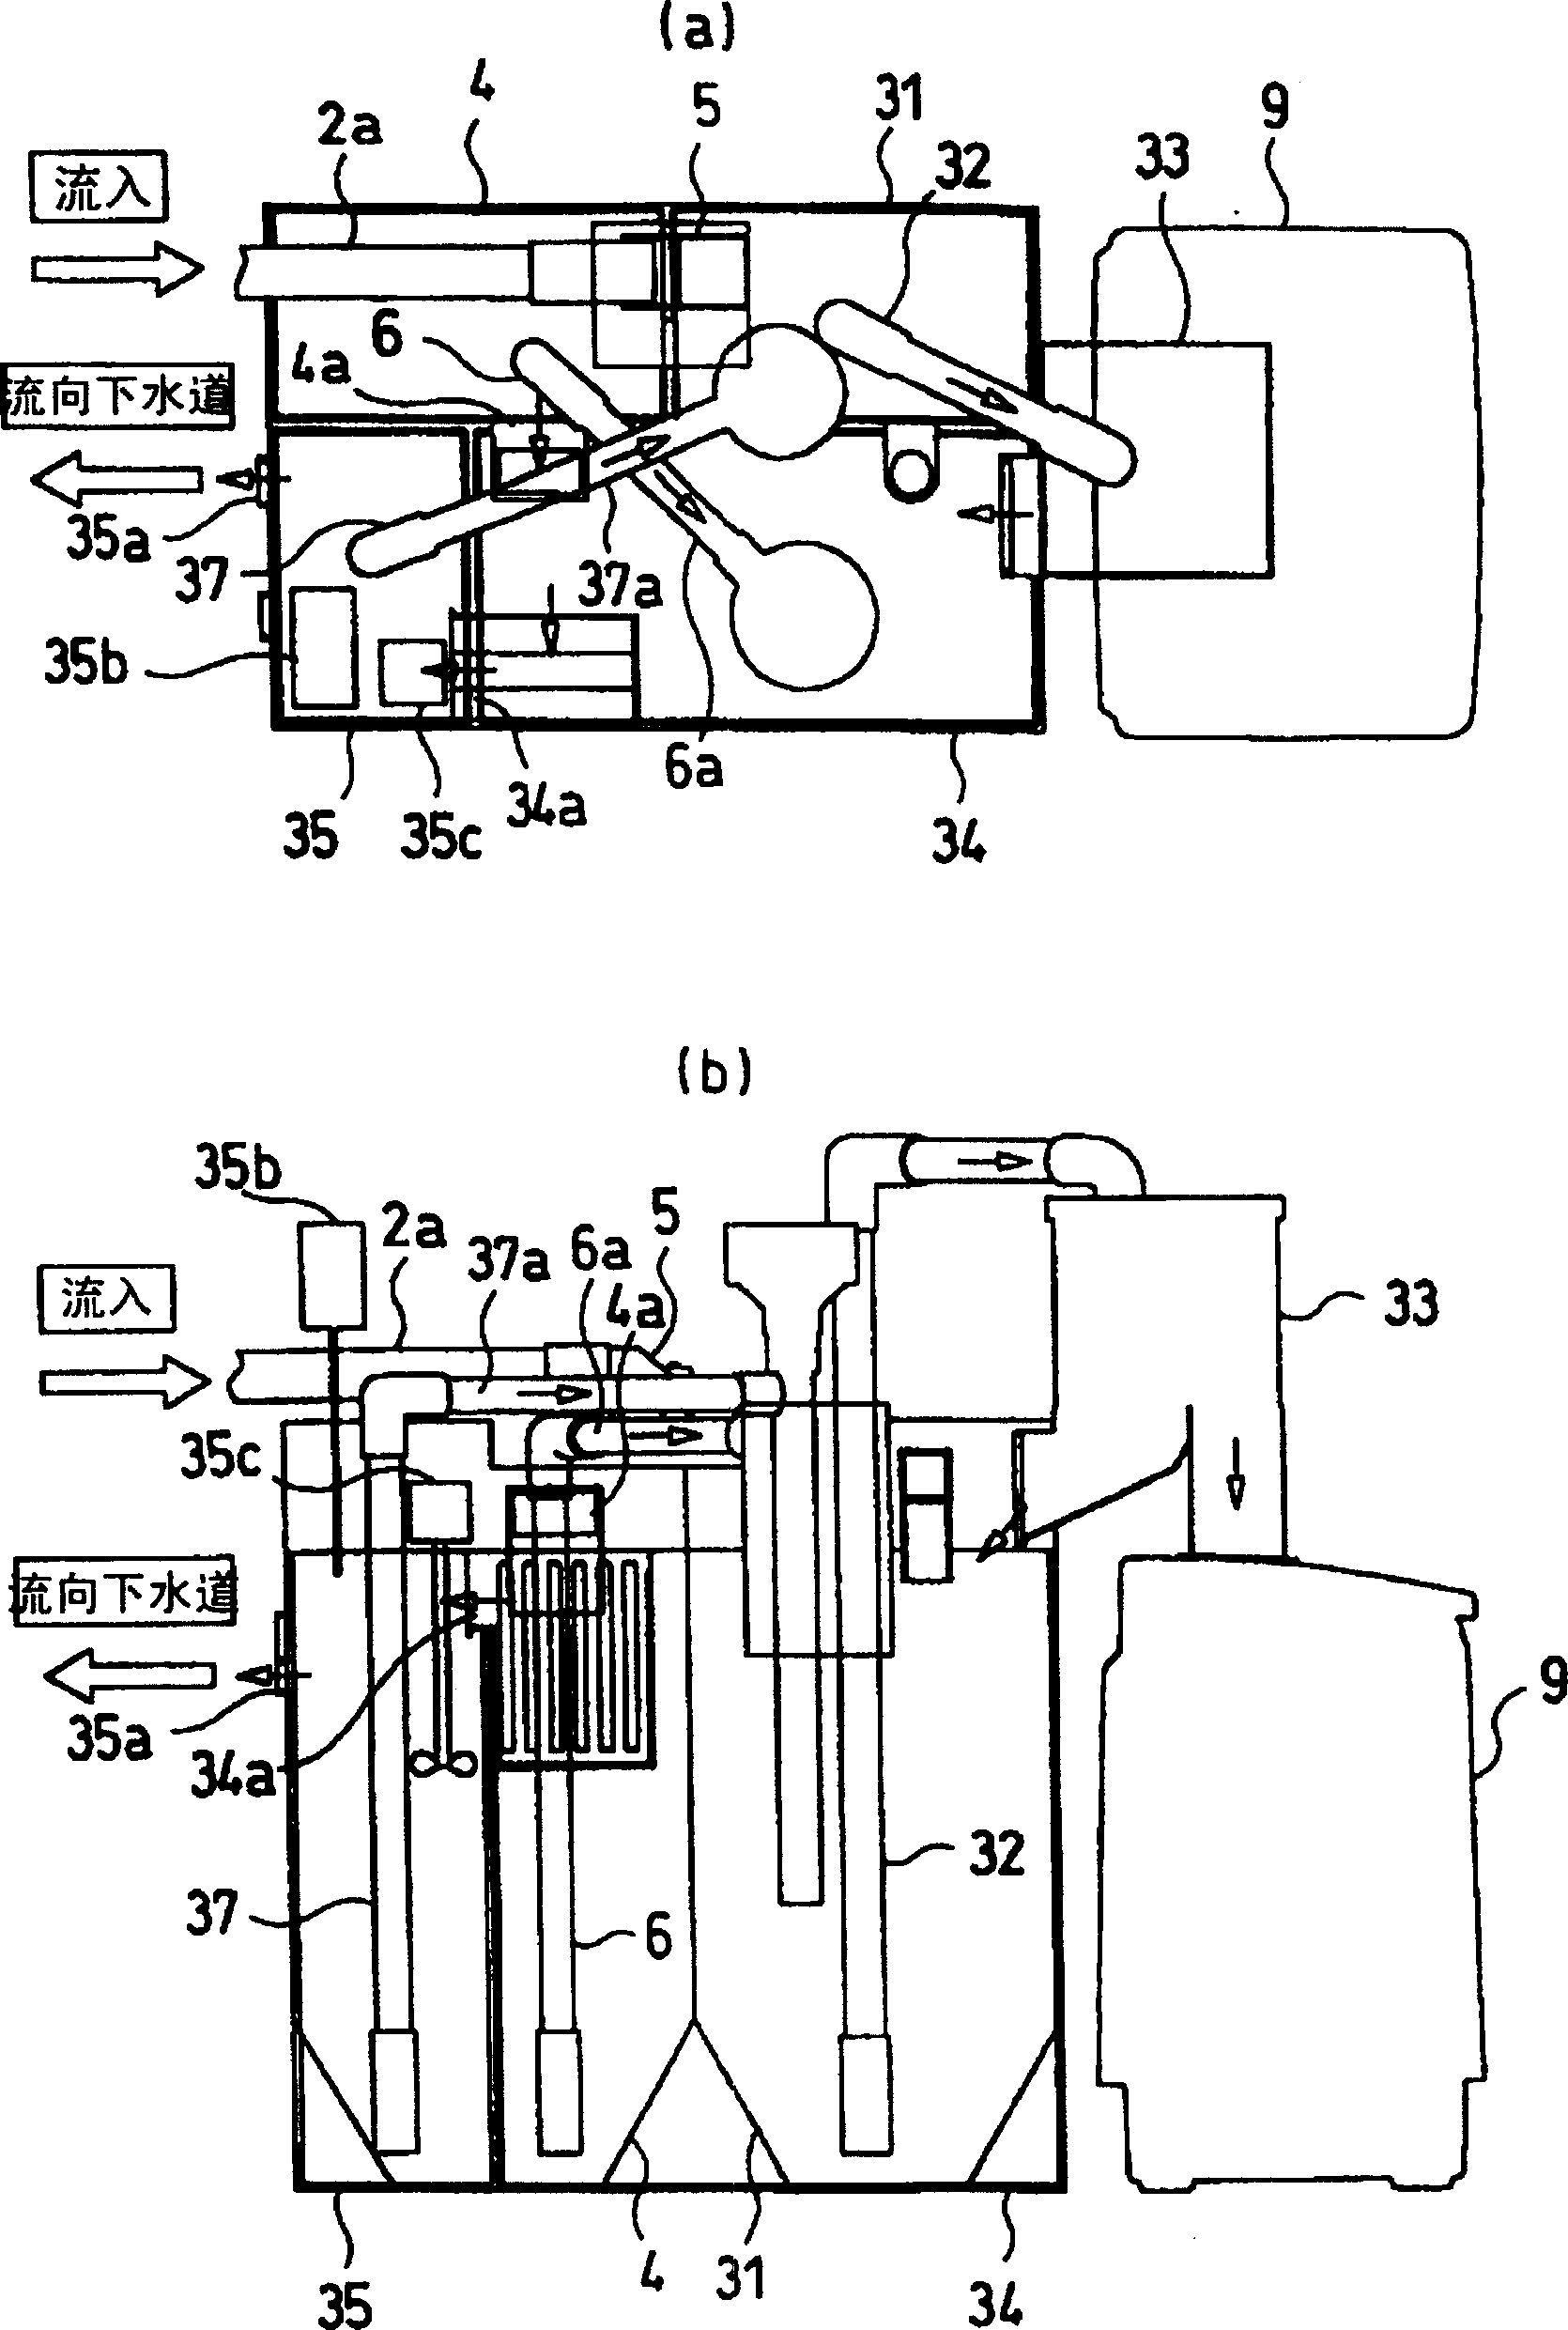 Processing system for drain off water